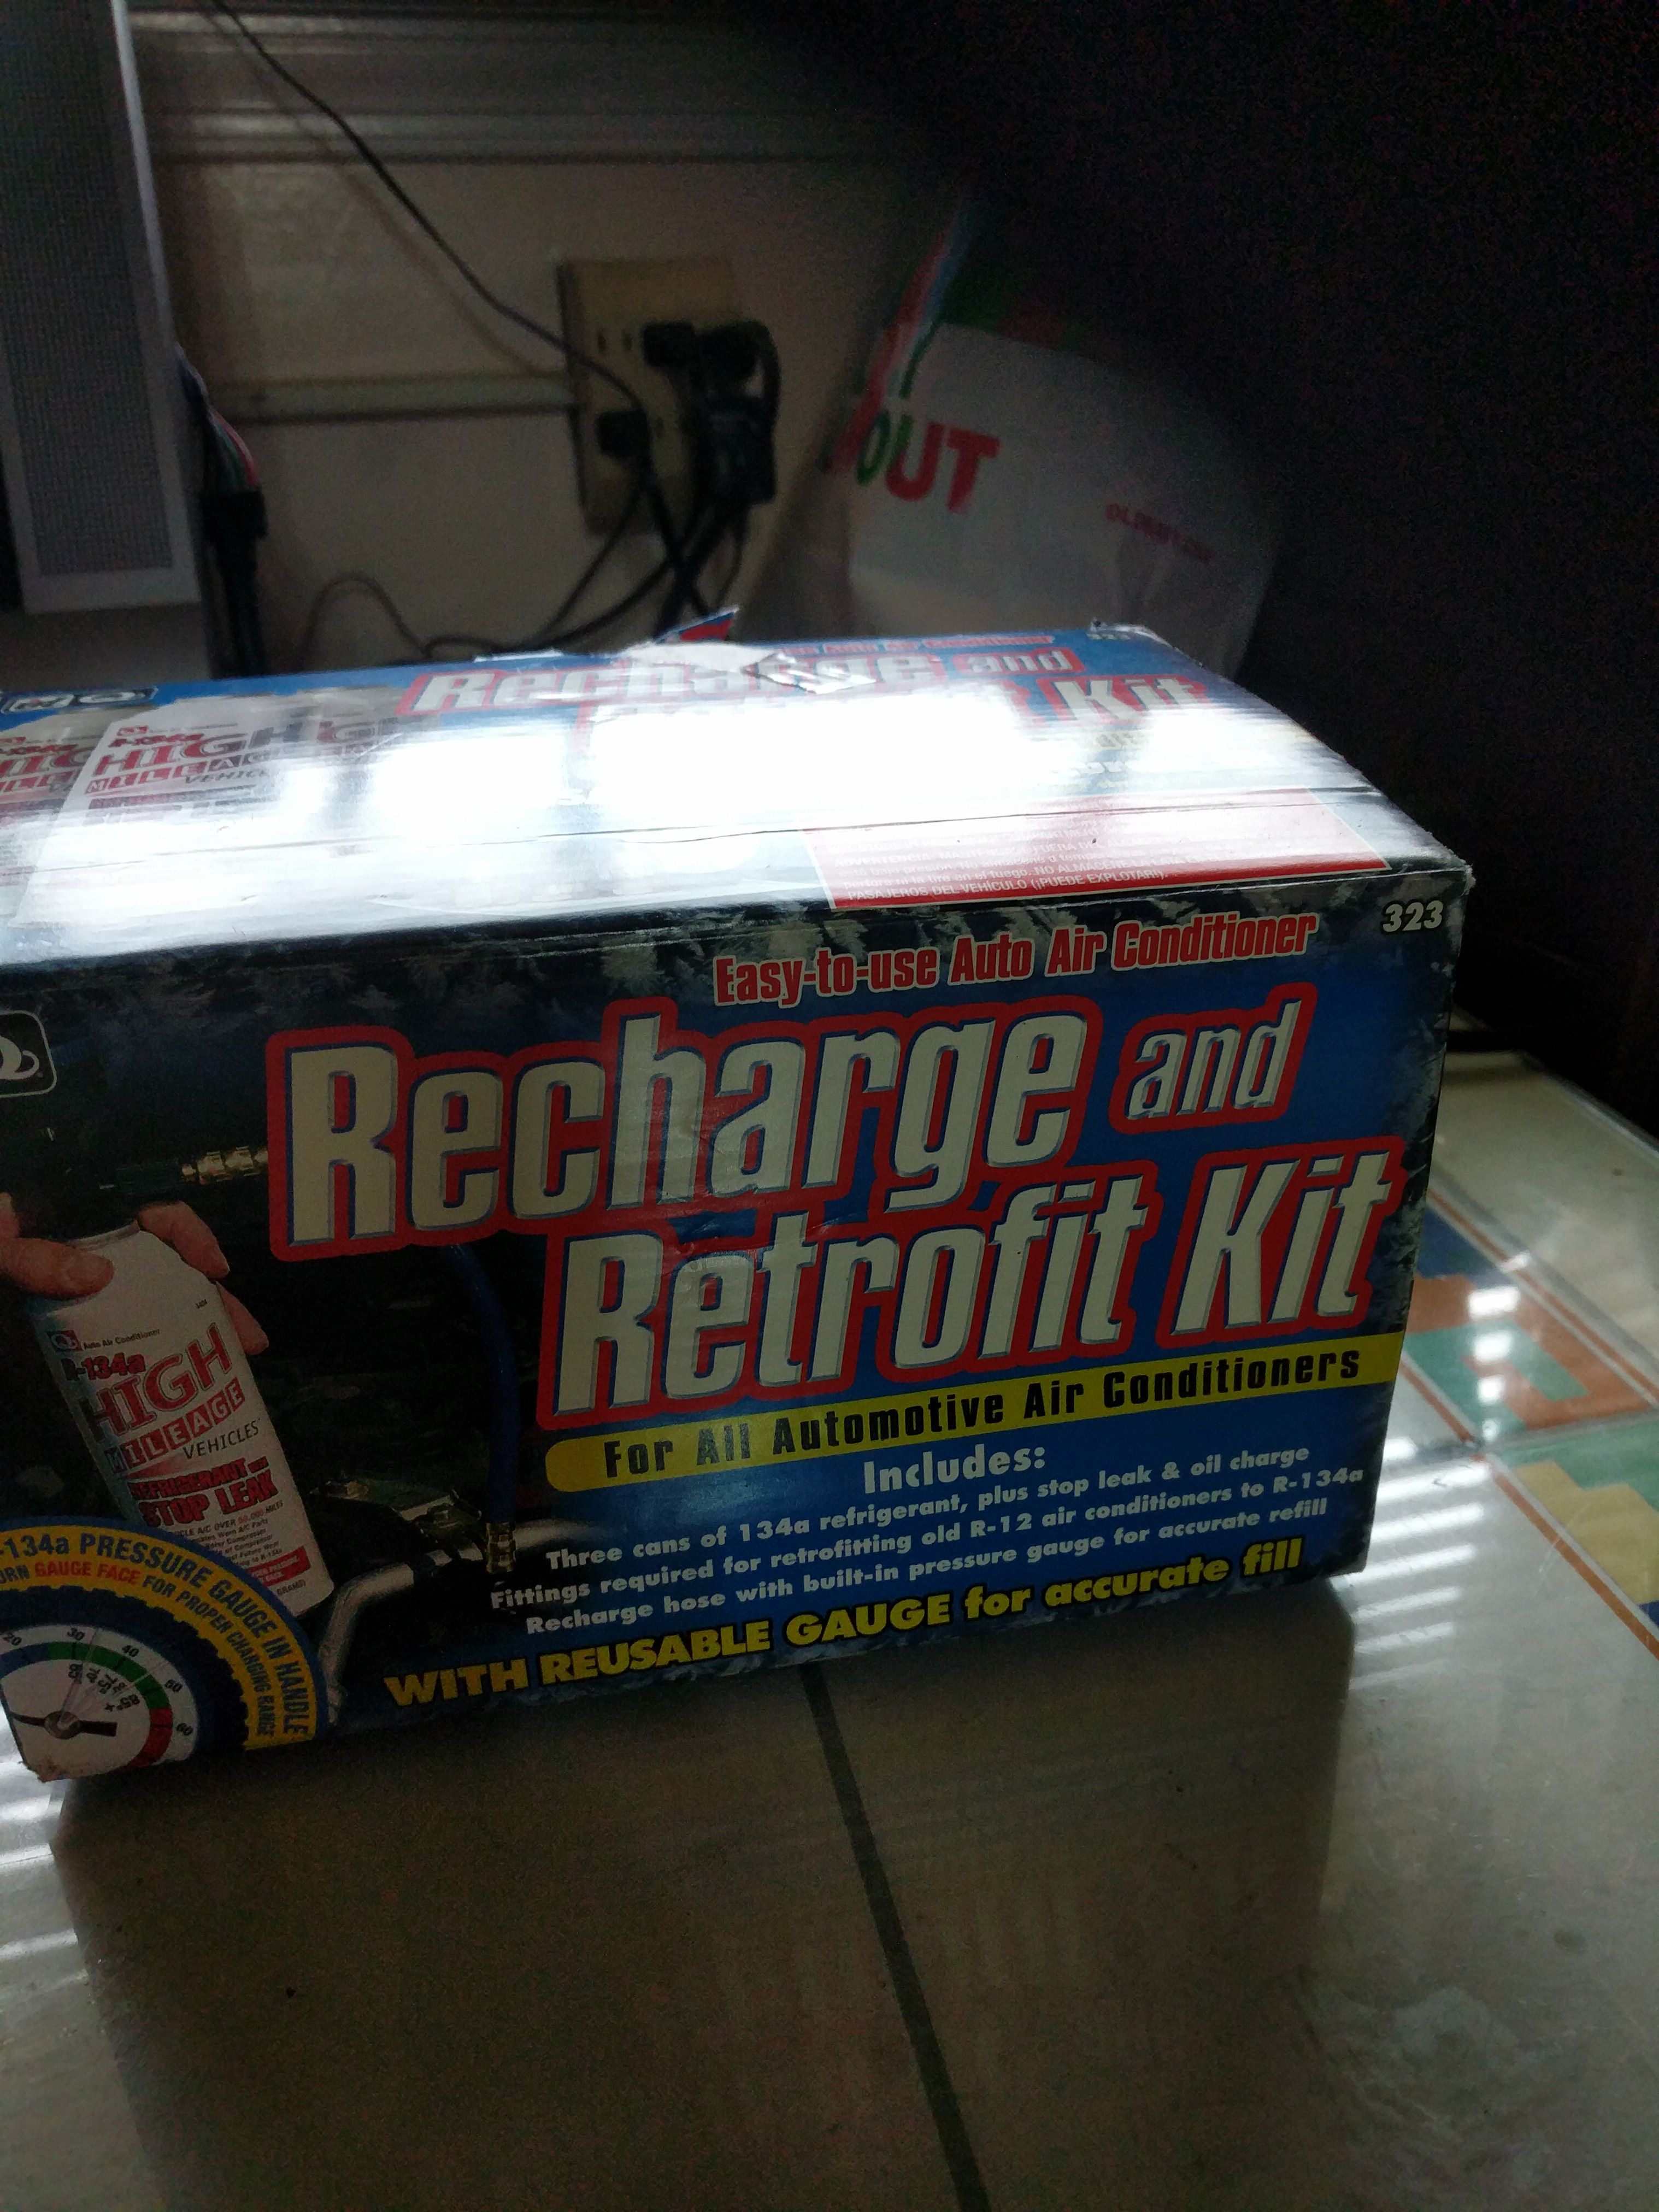 Car air conditioner recharge kit